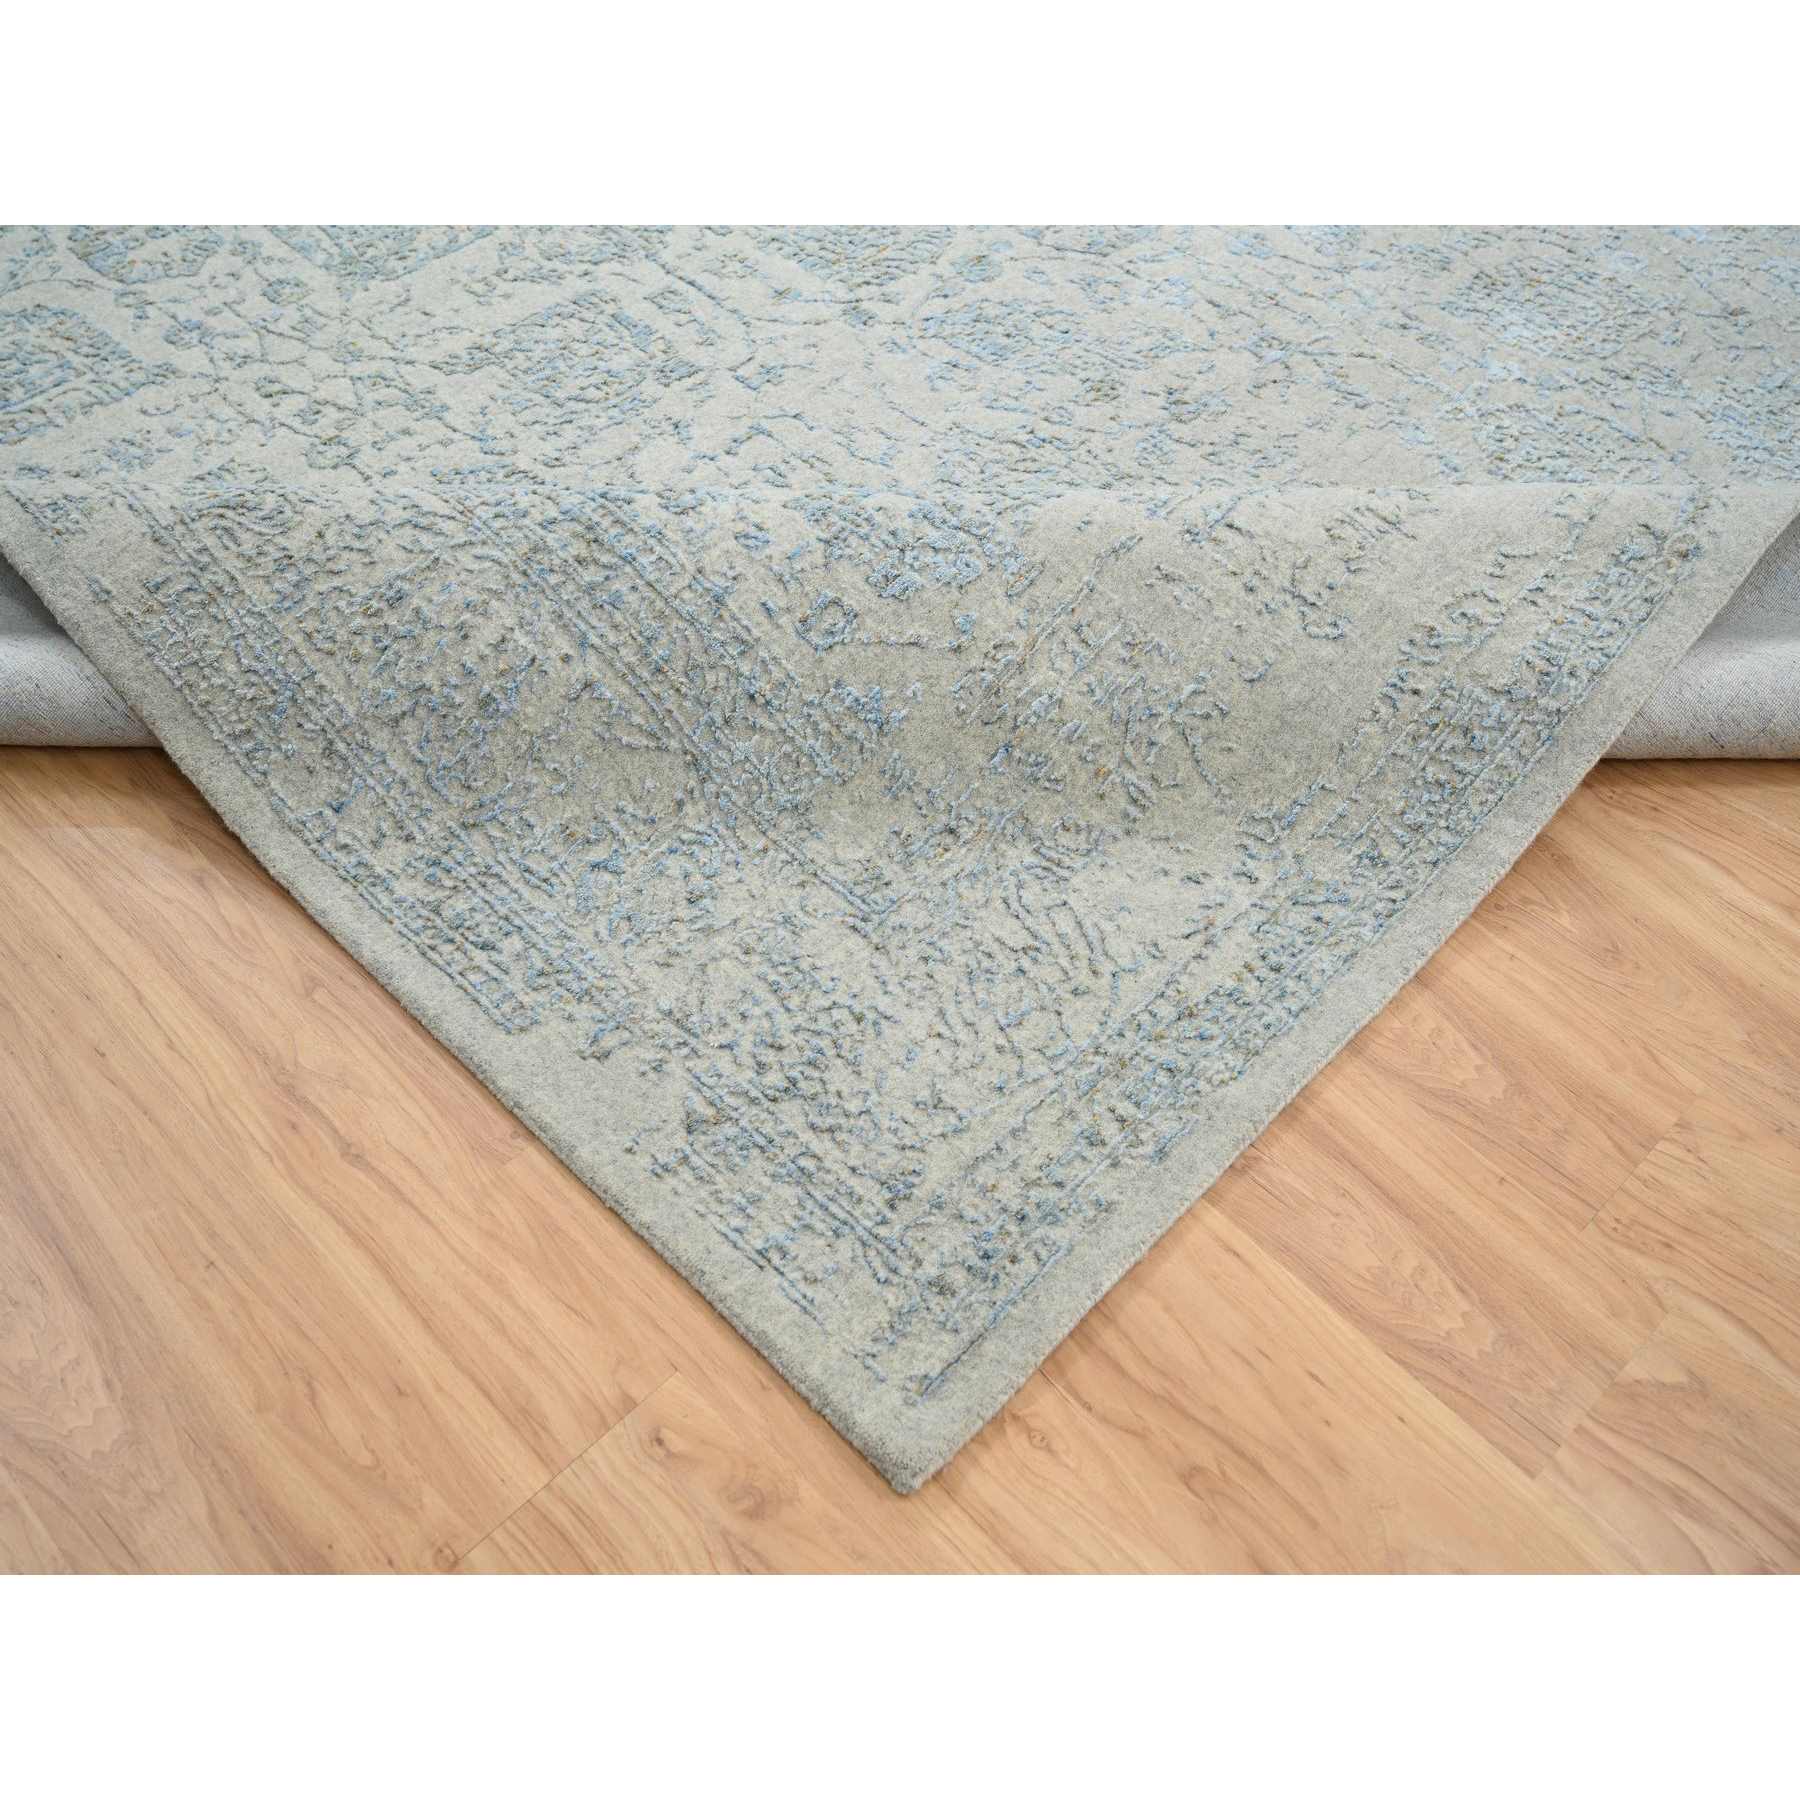 Transitional-Hand-Loomed-Rug-322720